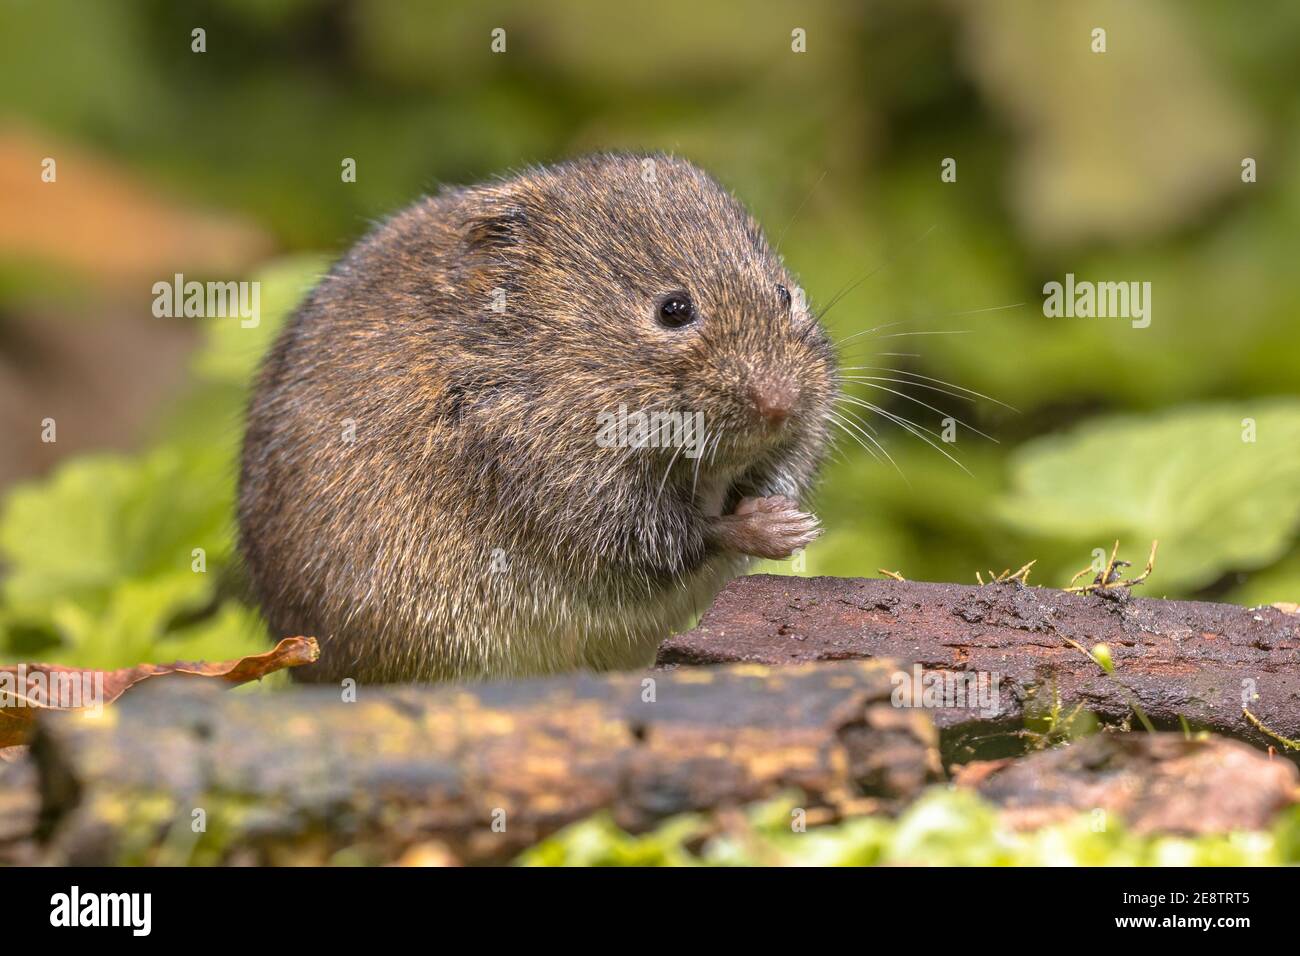 Field vole or short-tailed vole (Microtus agrestis) walking in natural habitat green forest environment. Stock Photo